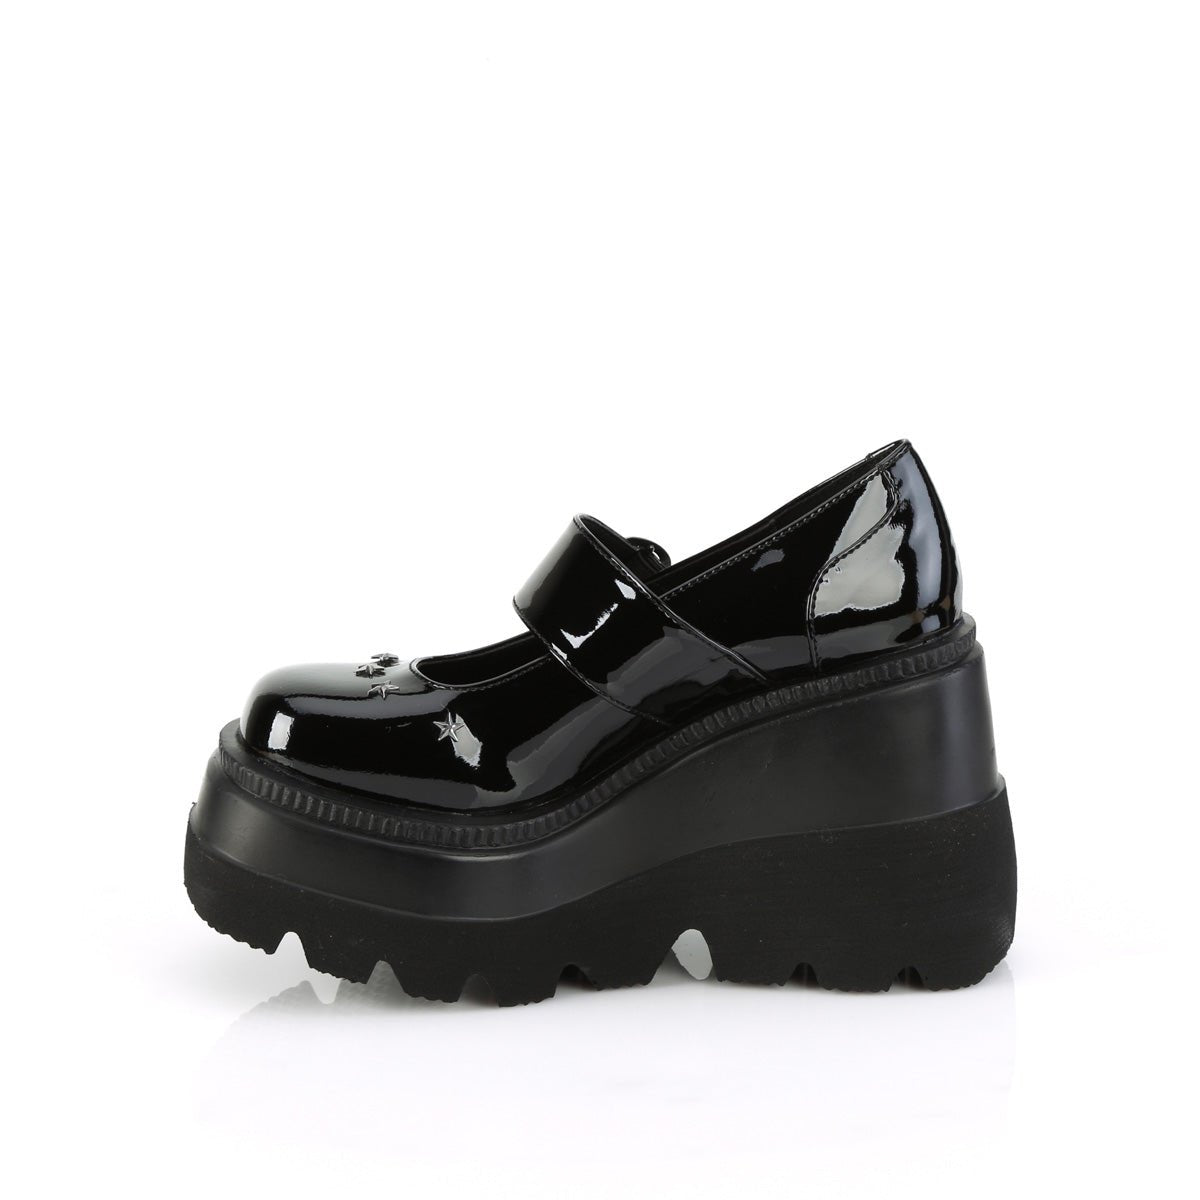 Too Fast | Demonia SHAKER-23 | Black Patent Leather Mary Janes